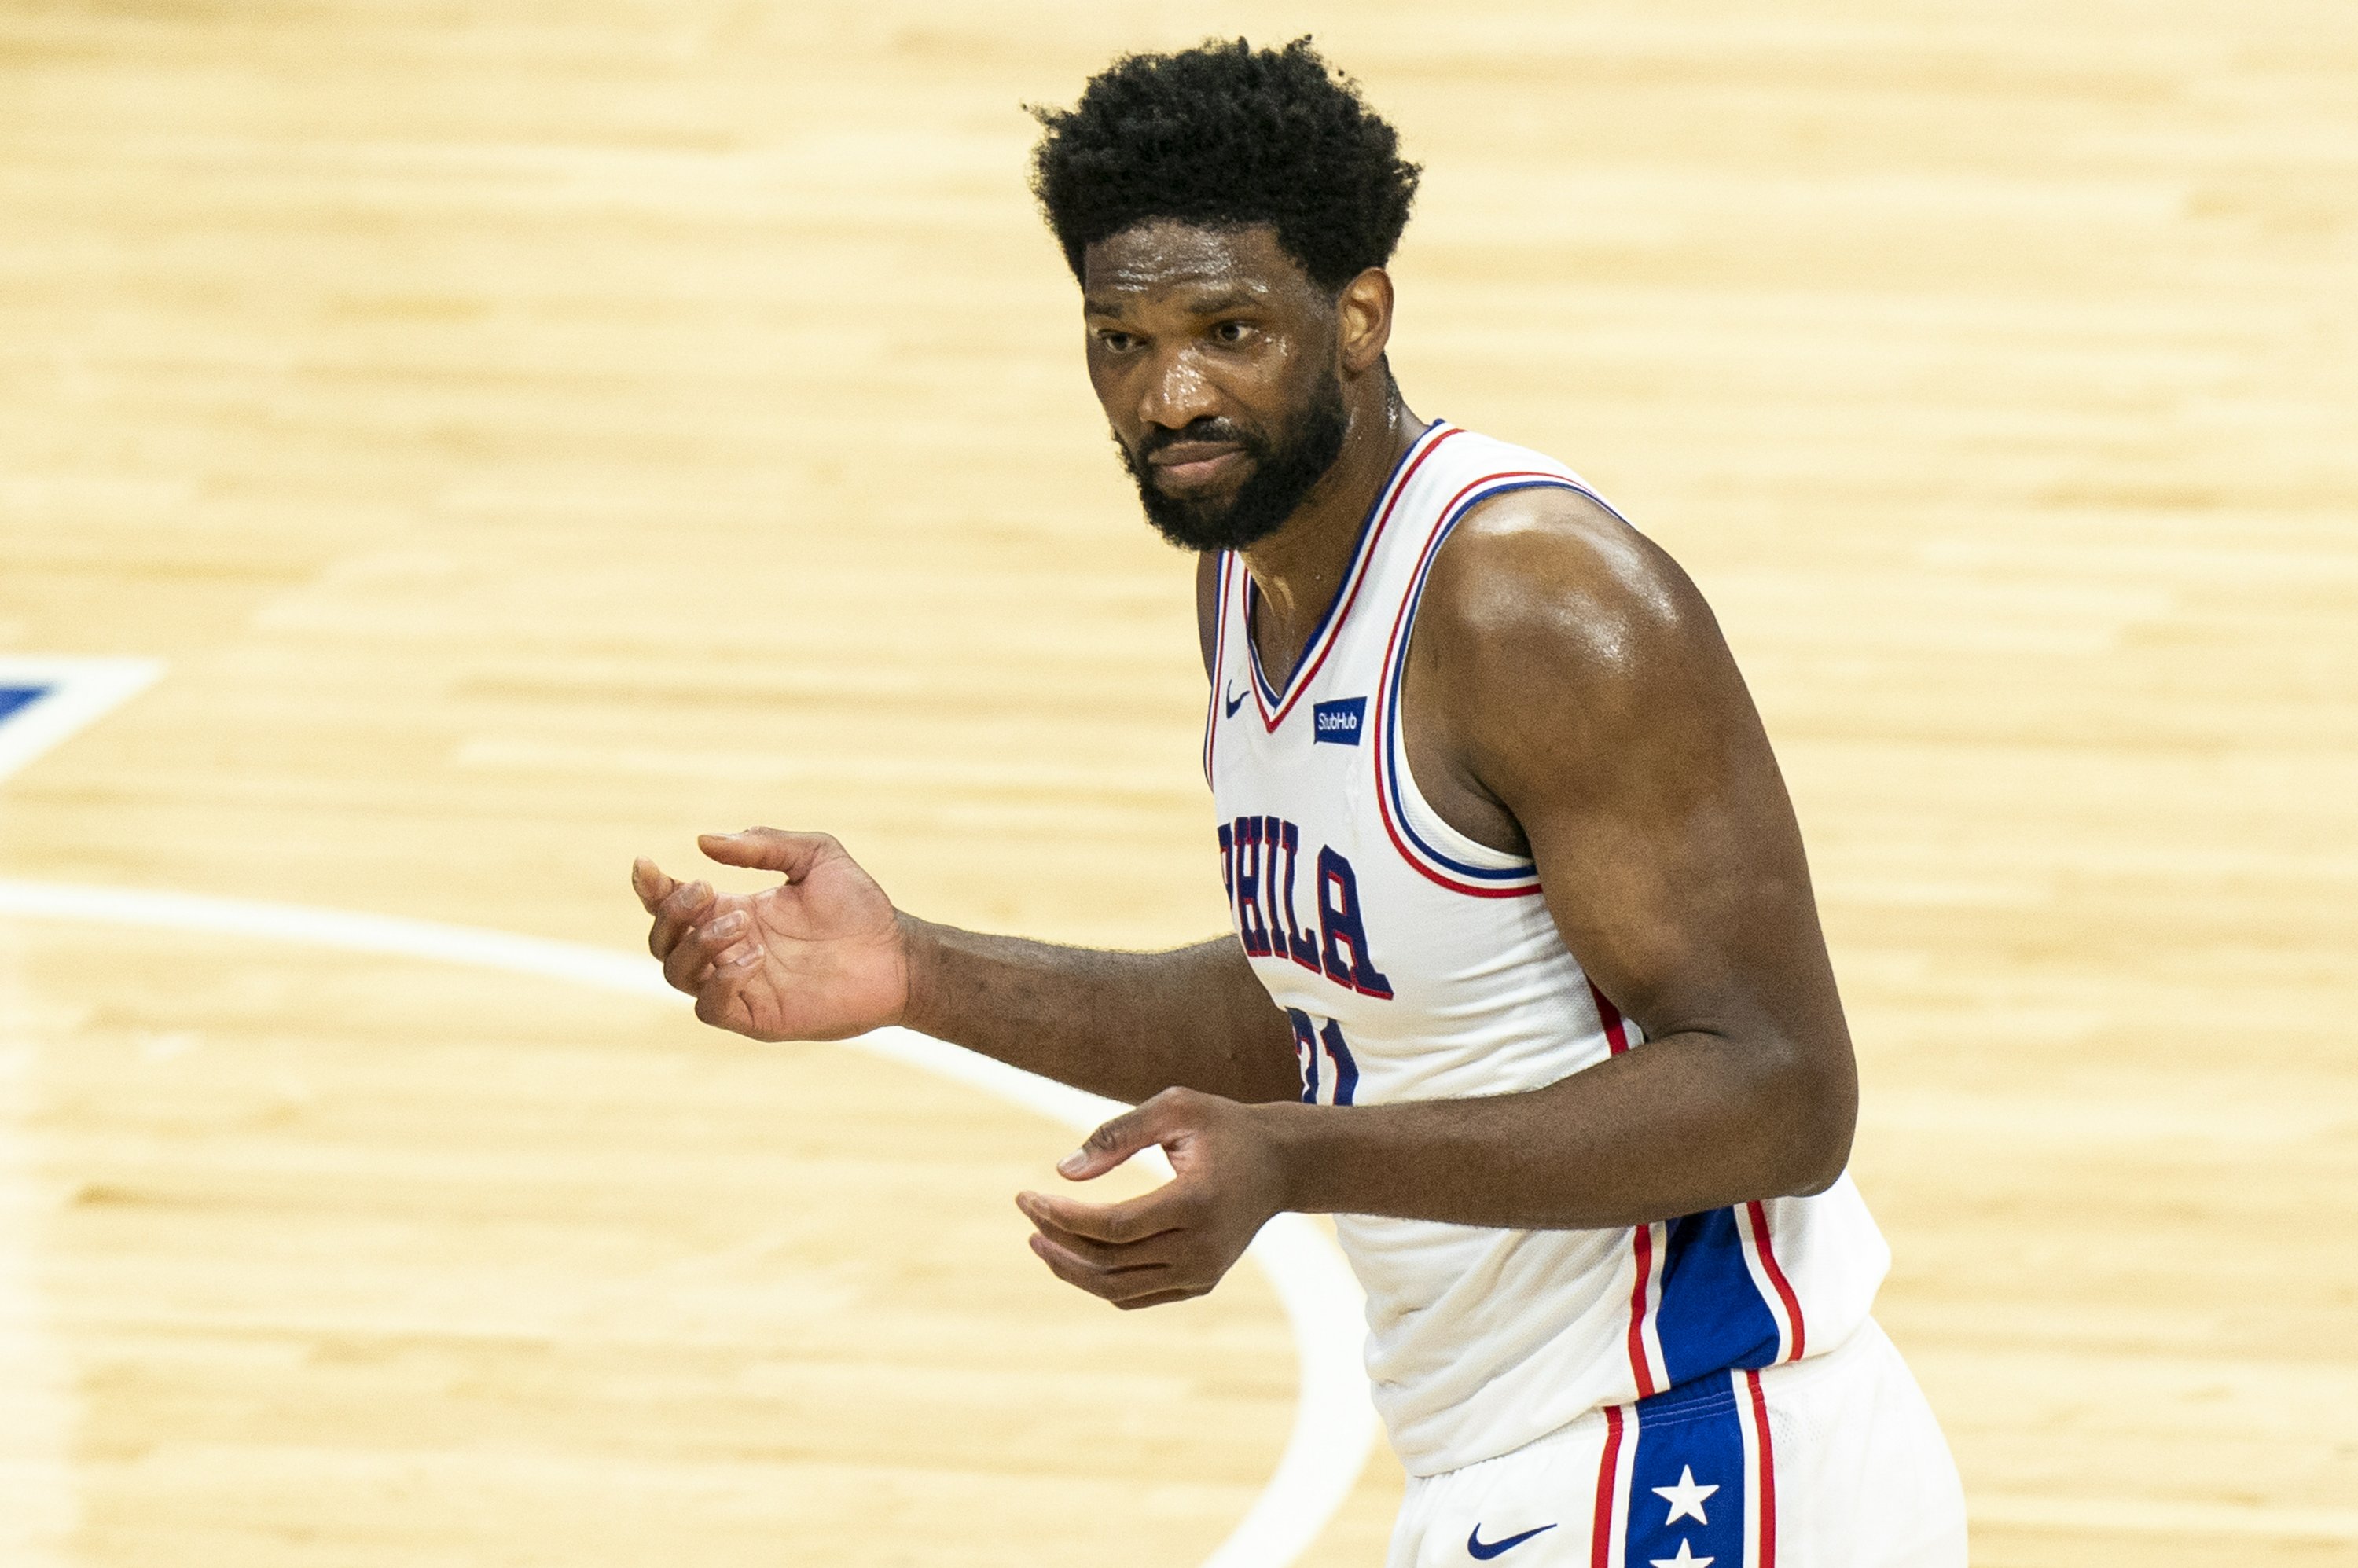 Philadelphia's Embiid out against the Grizzlies | AP News